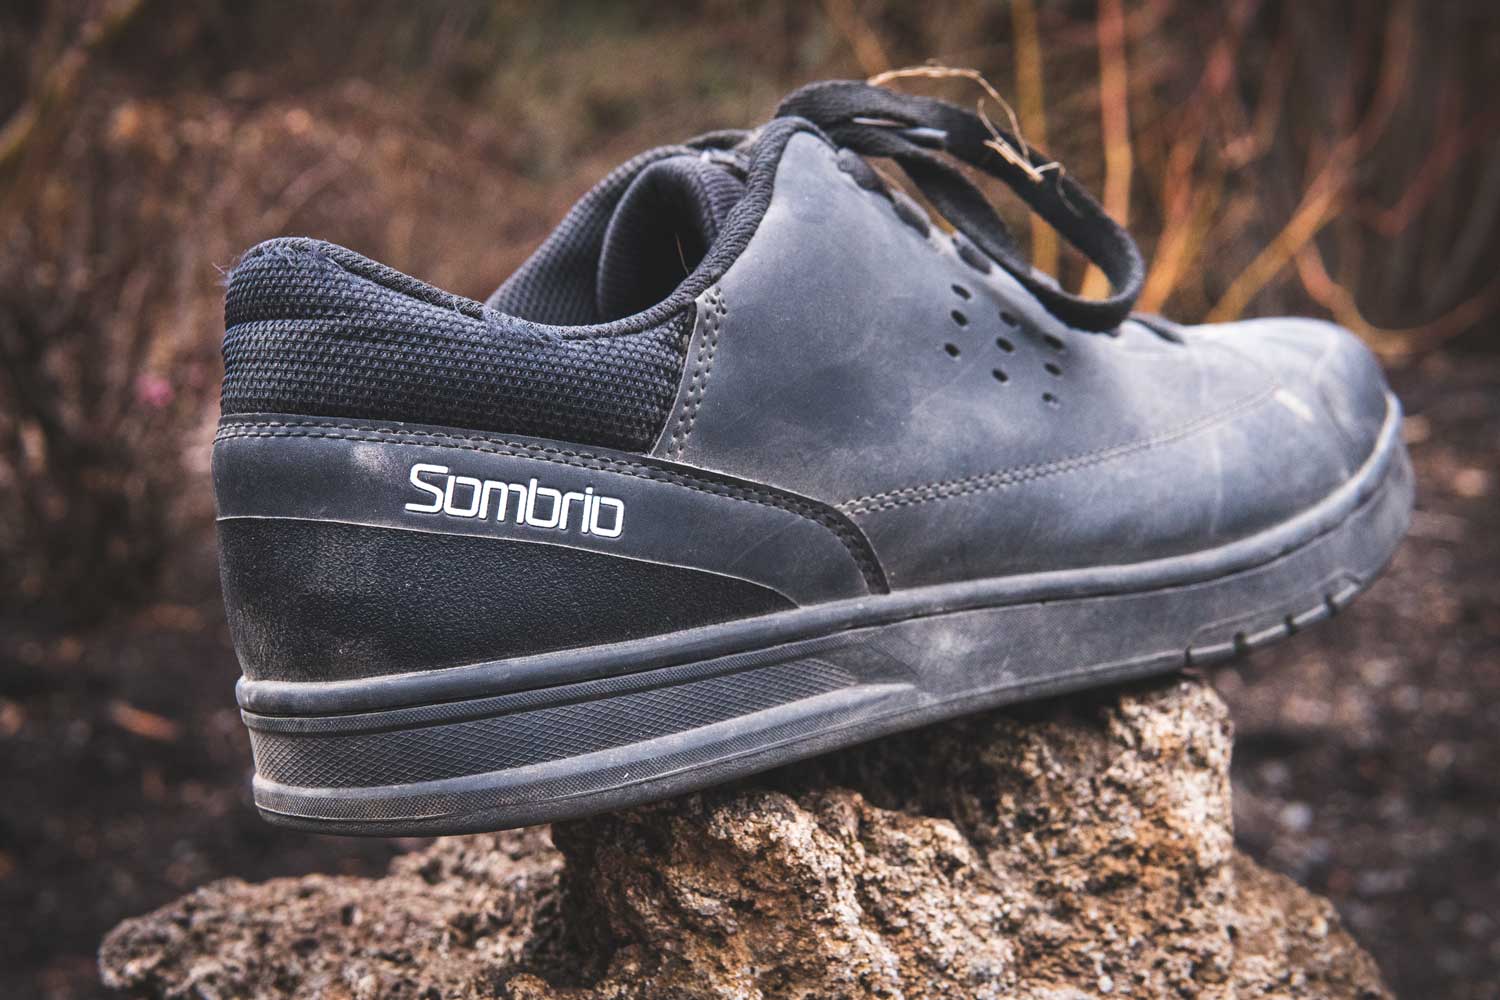 Sombrio Sender Shoes Review